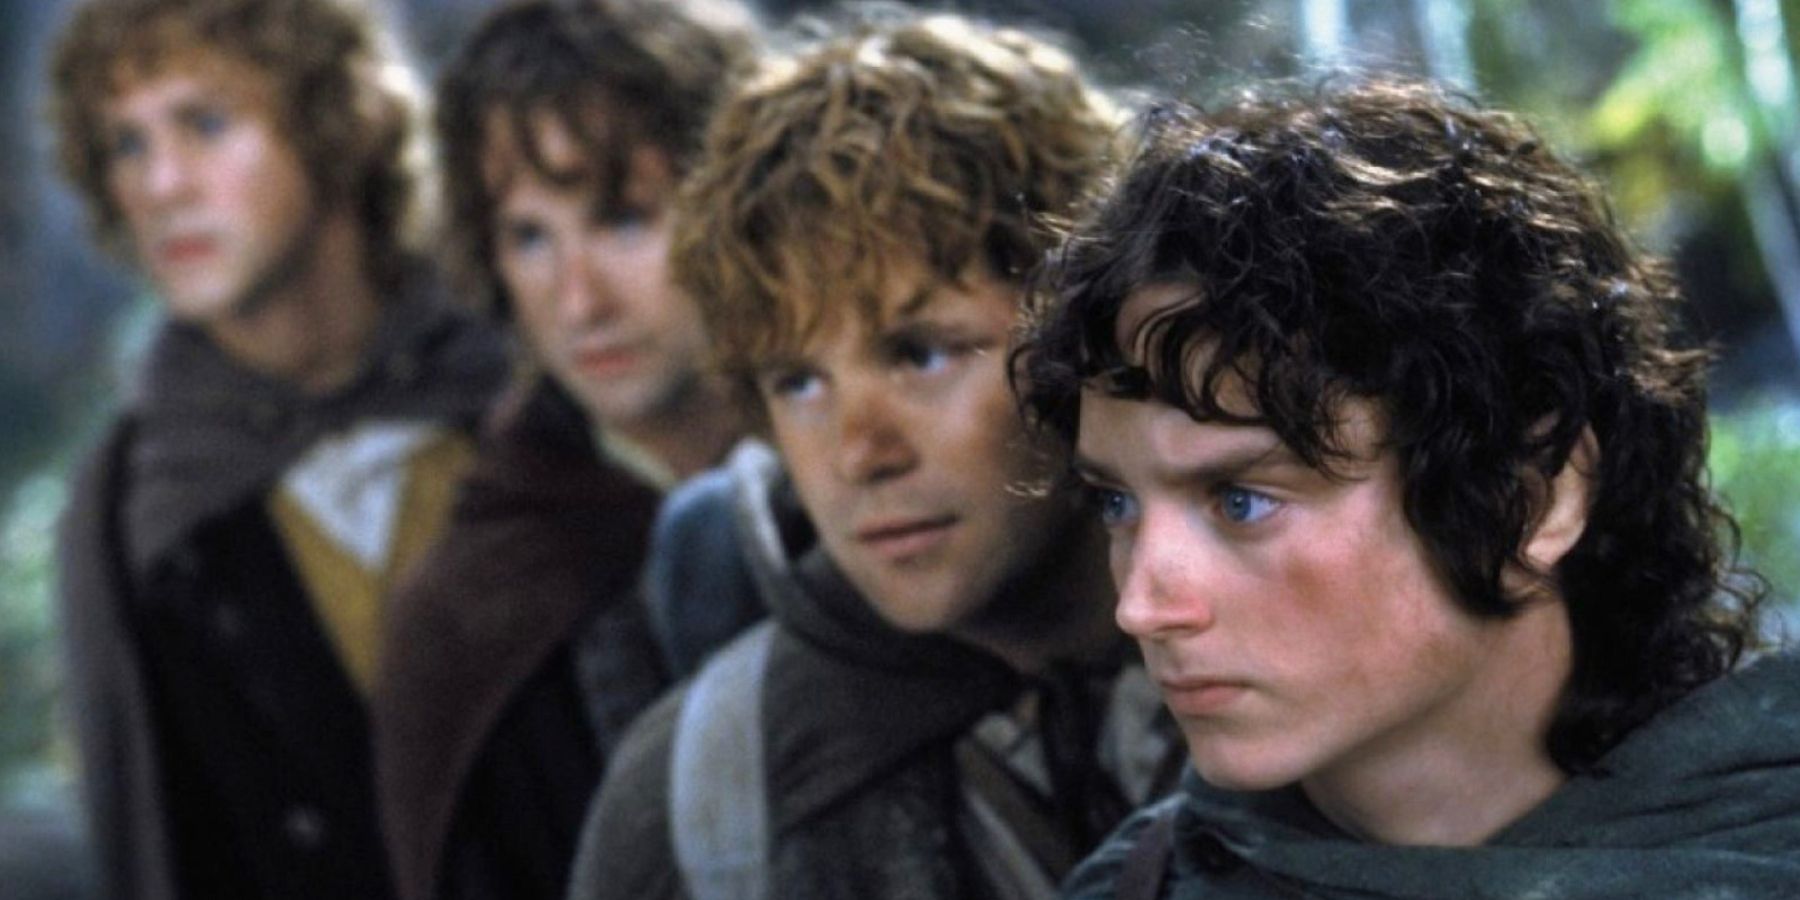 the four hobbits